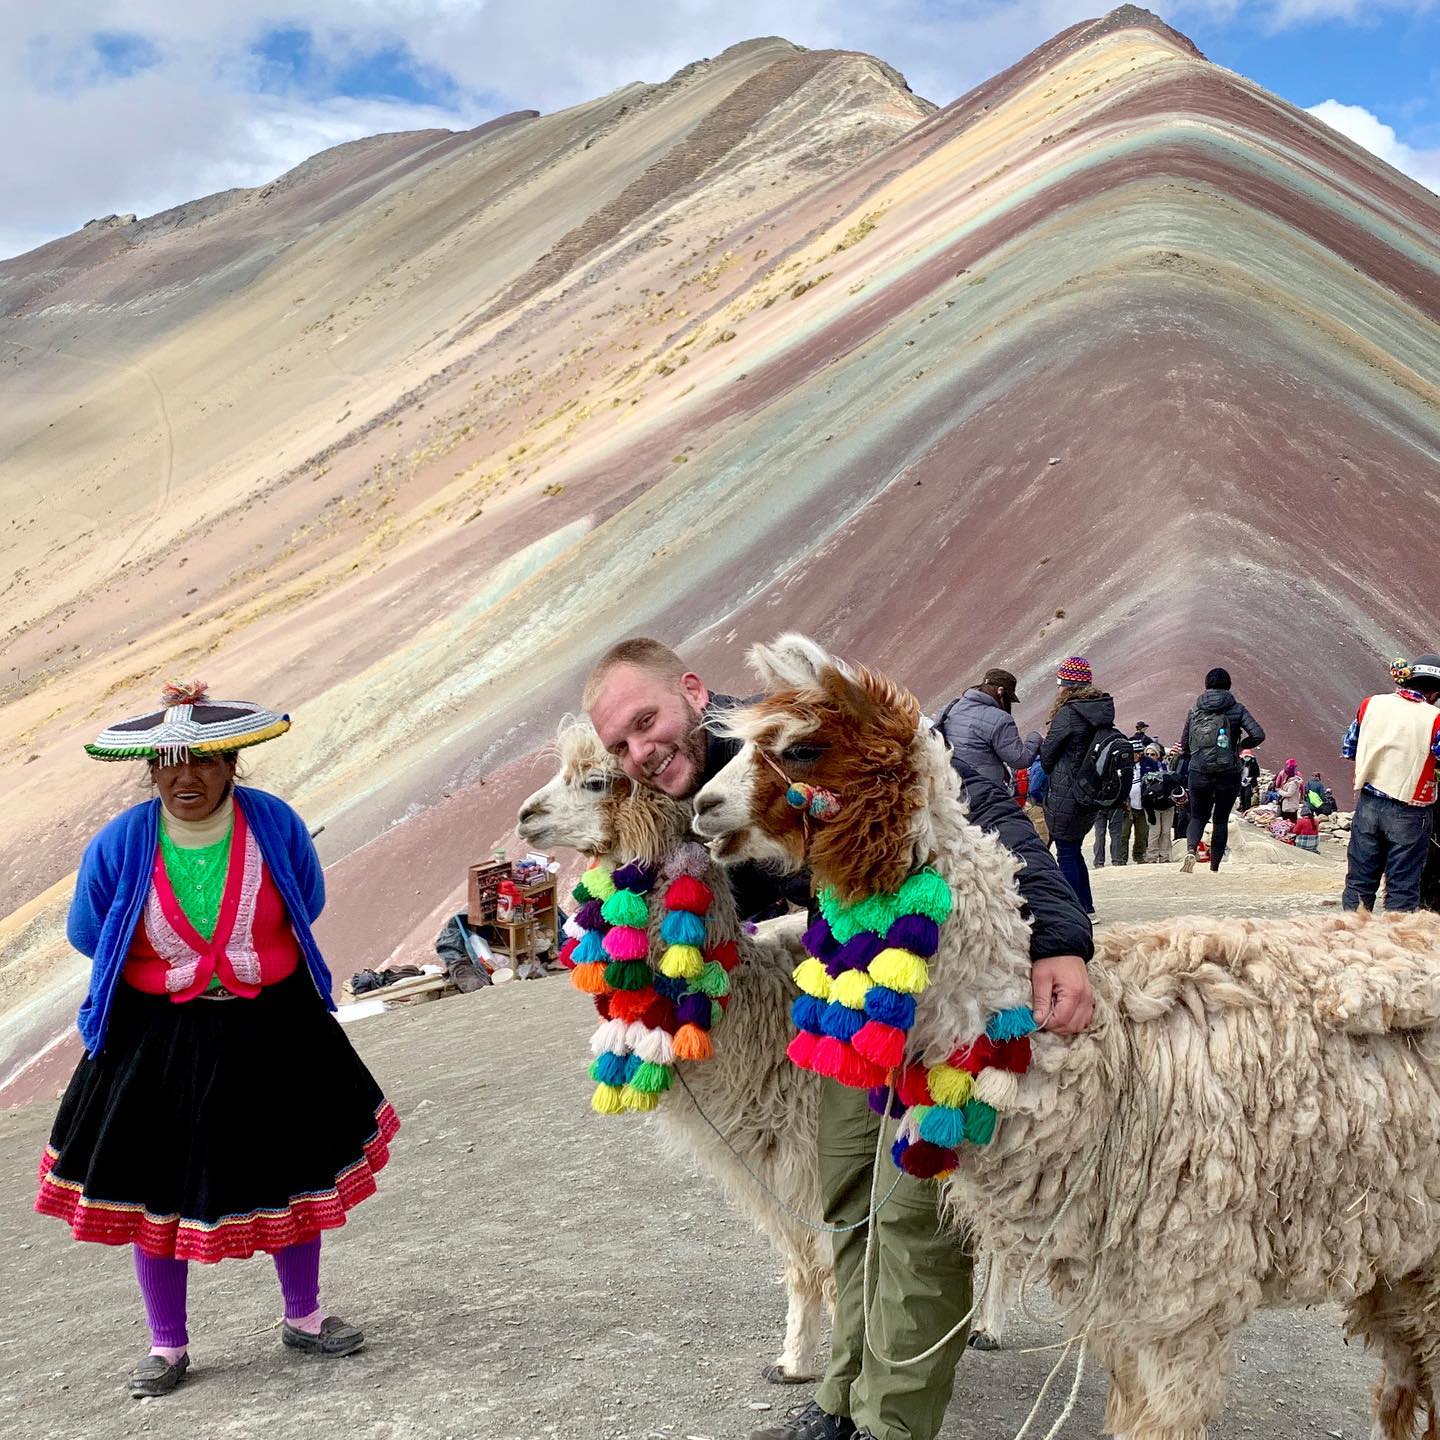 Peru Day 2: can’t be an influencer if you don’t post a picture with alpaca at 17,000 feet on Rainbow Mountain. Fun fact: the colors come from the weathering of various minerals in the mountain. Sad fact: up until about 9 years ago, you couldn’t see them because it was almost always covered in snow.